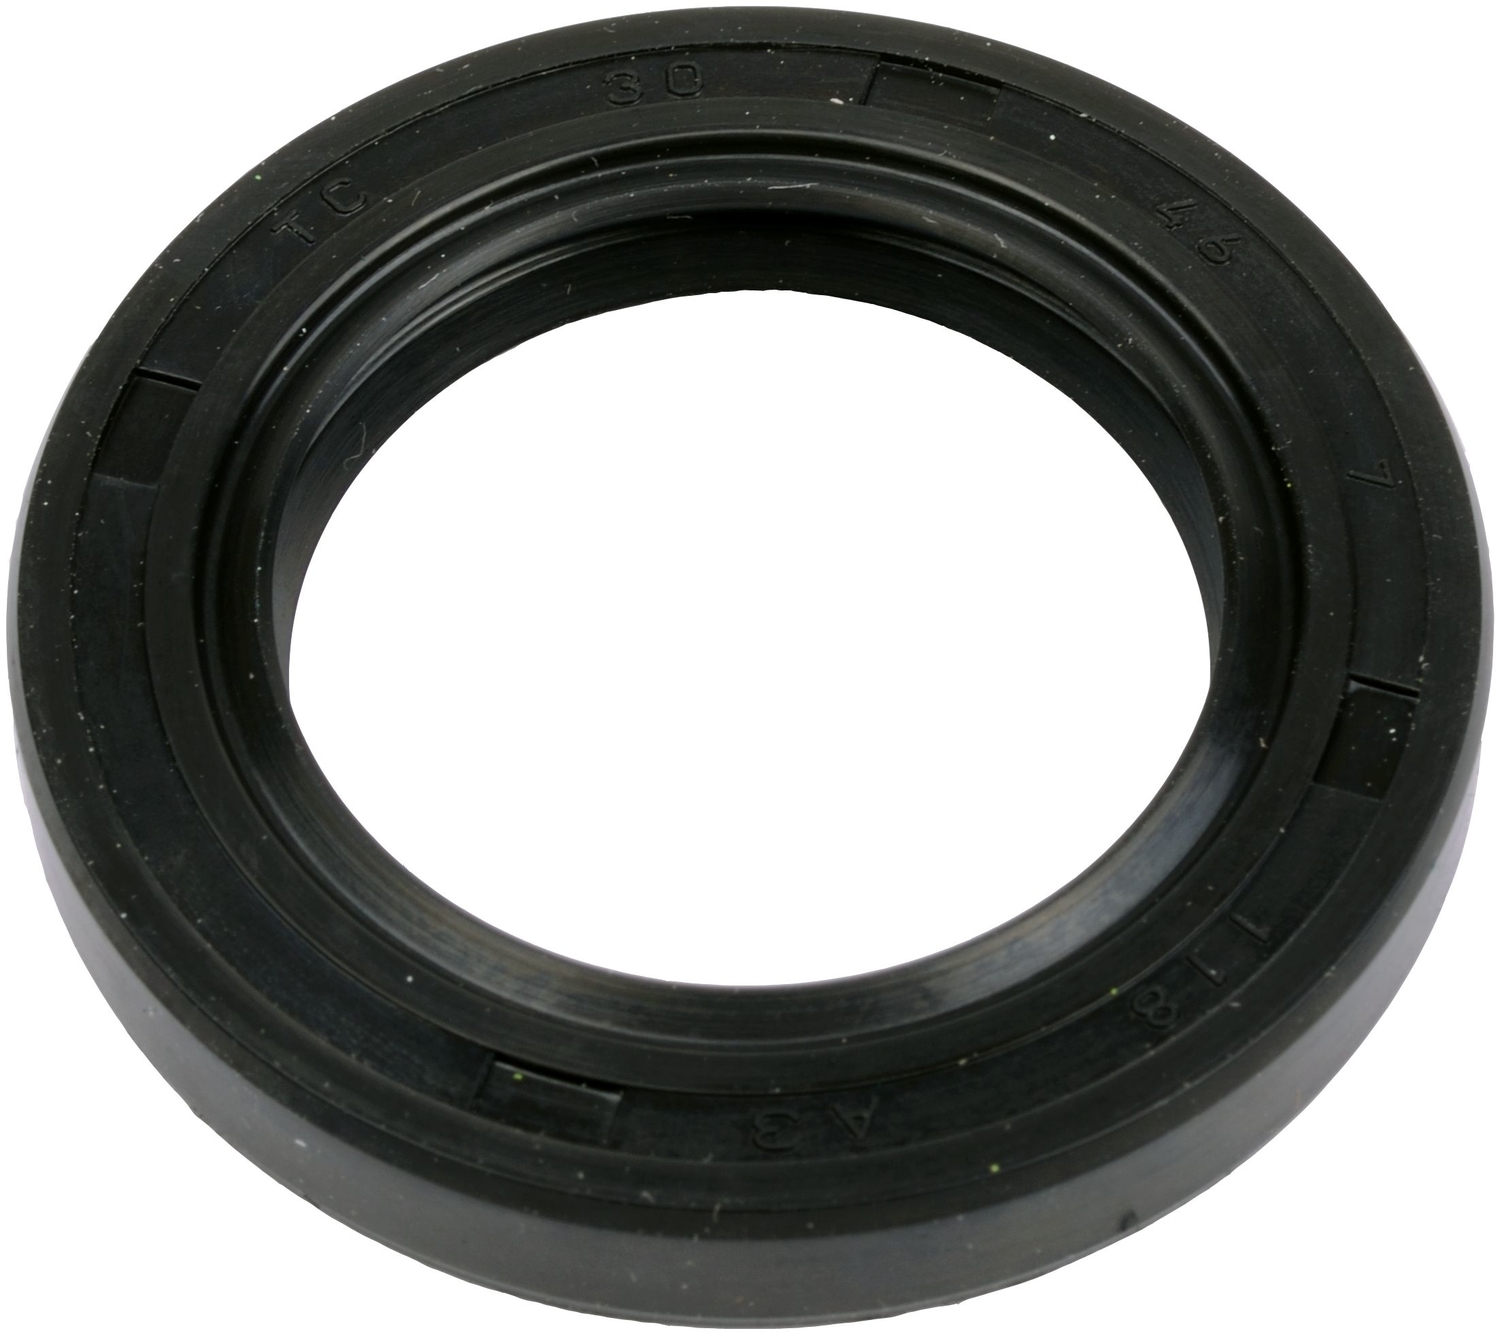 SKF (CHICAGO RAWHIDE) - Auto Trans Extension Housing Seal - SKF 15920